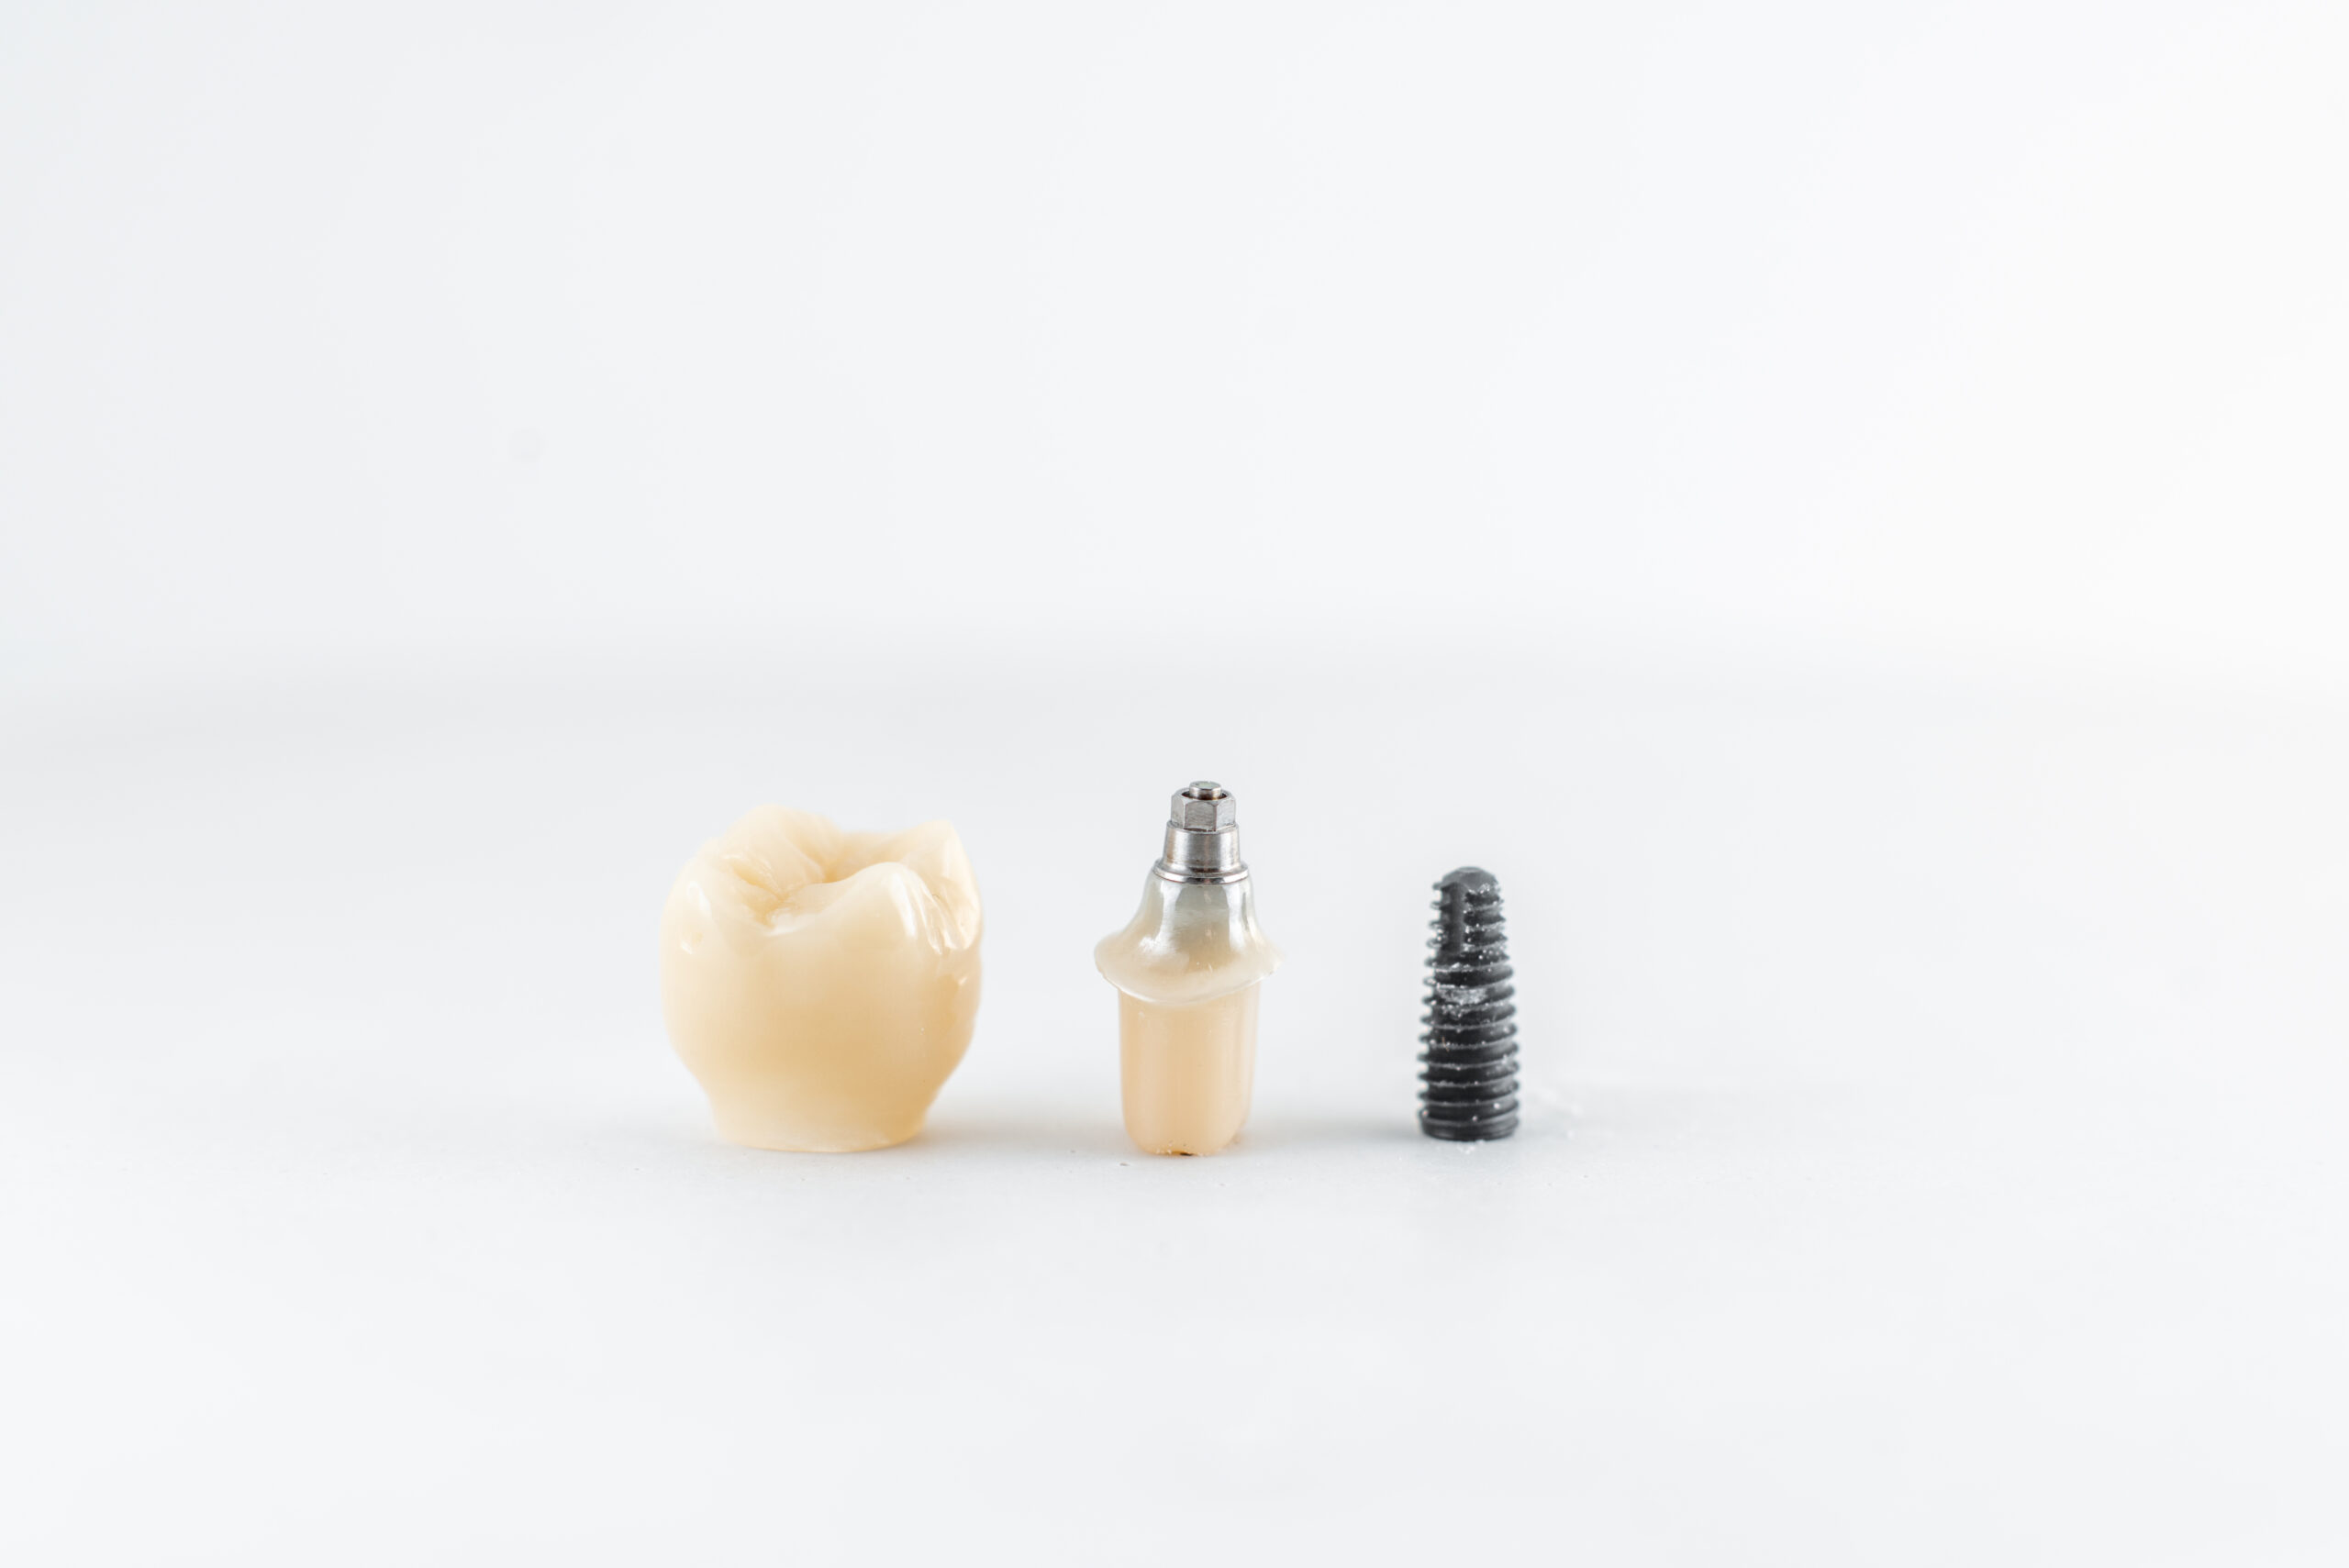 Dental implant with screw and crown